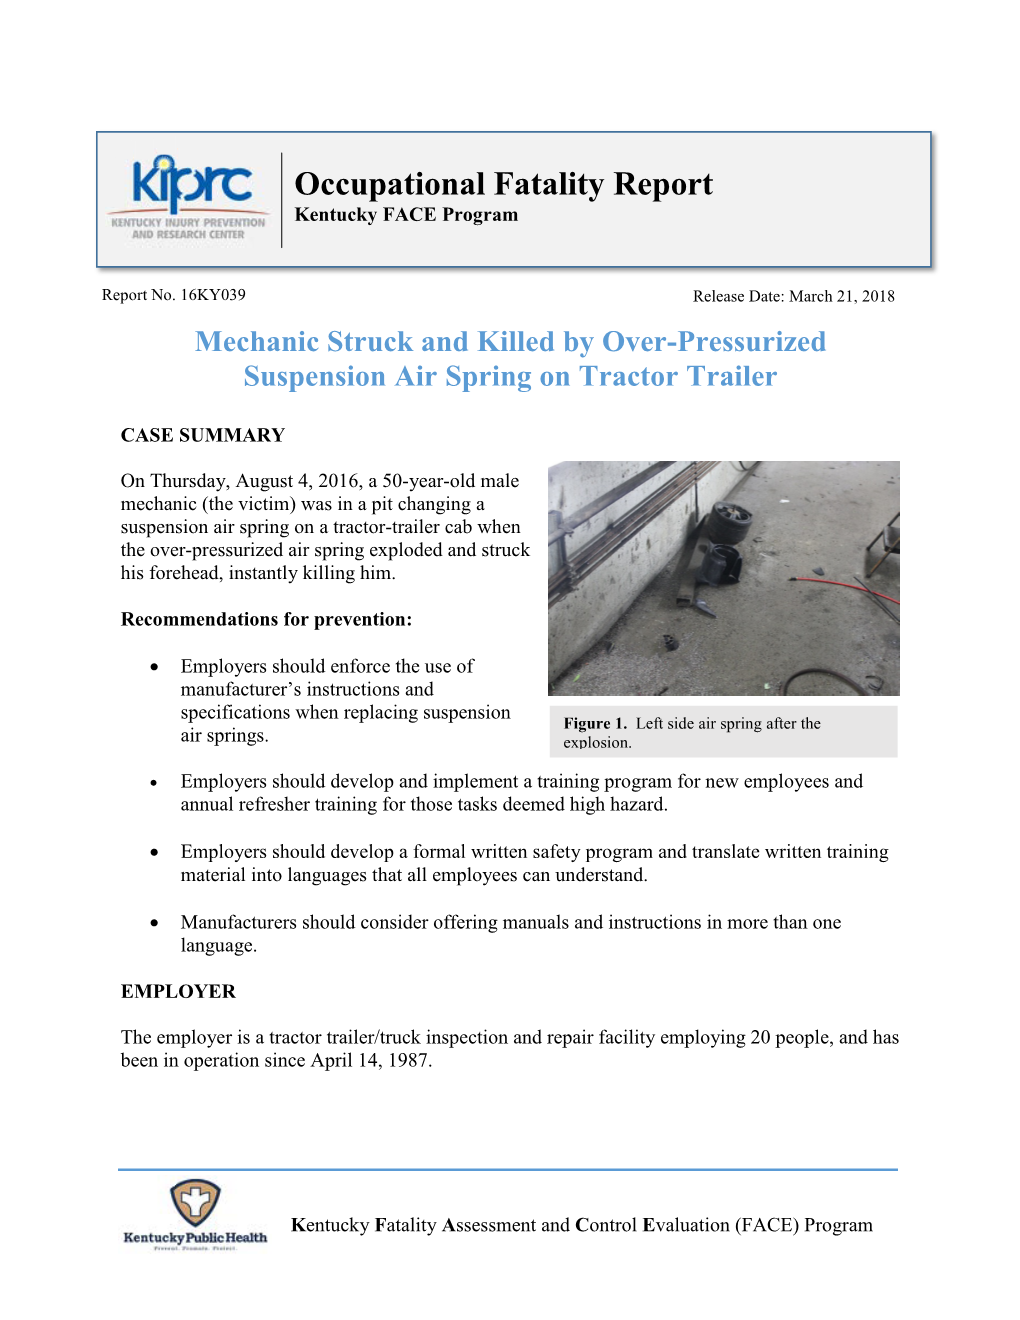 FACE Report No. 16KY039, Mechanic Struck and Killed by Over